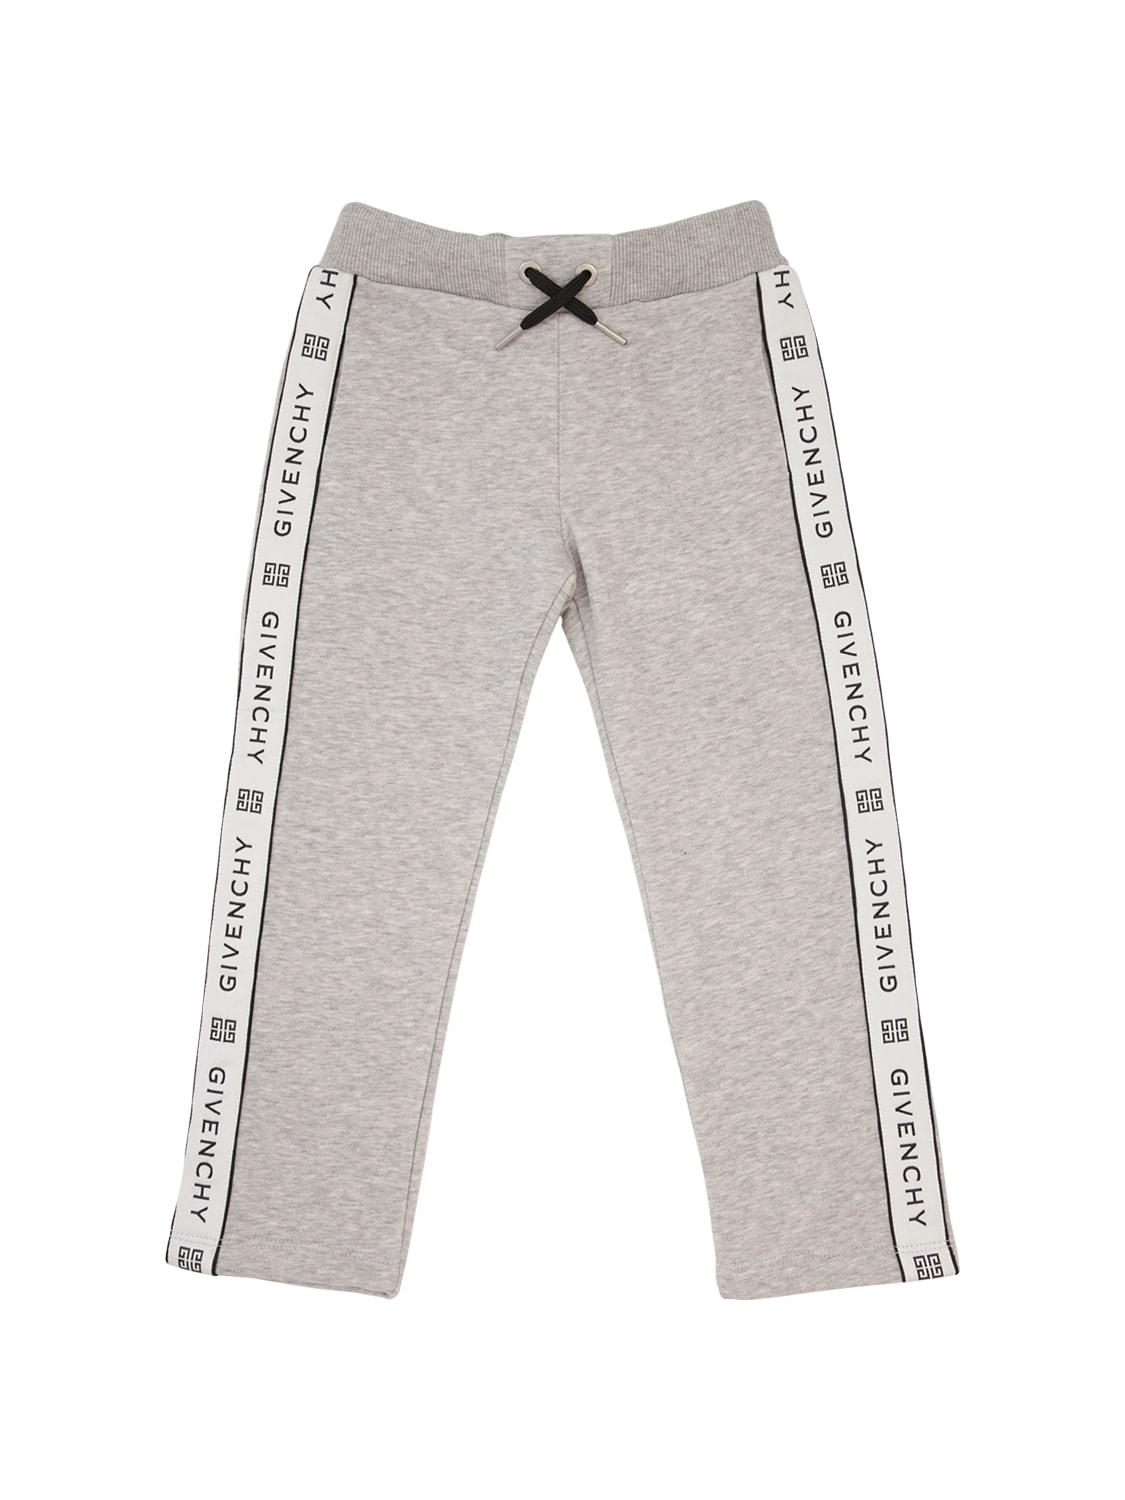 givenchy sweatpants womens